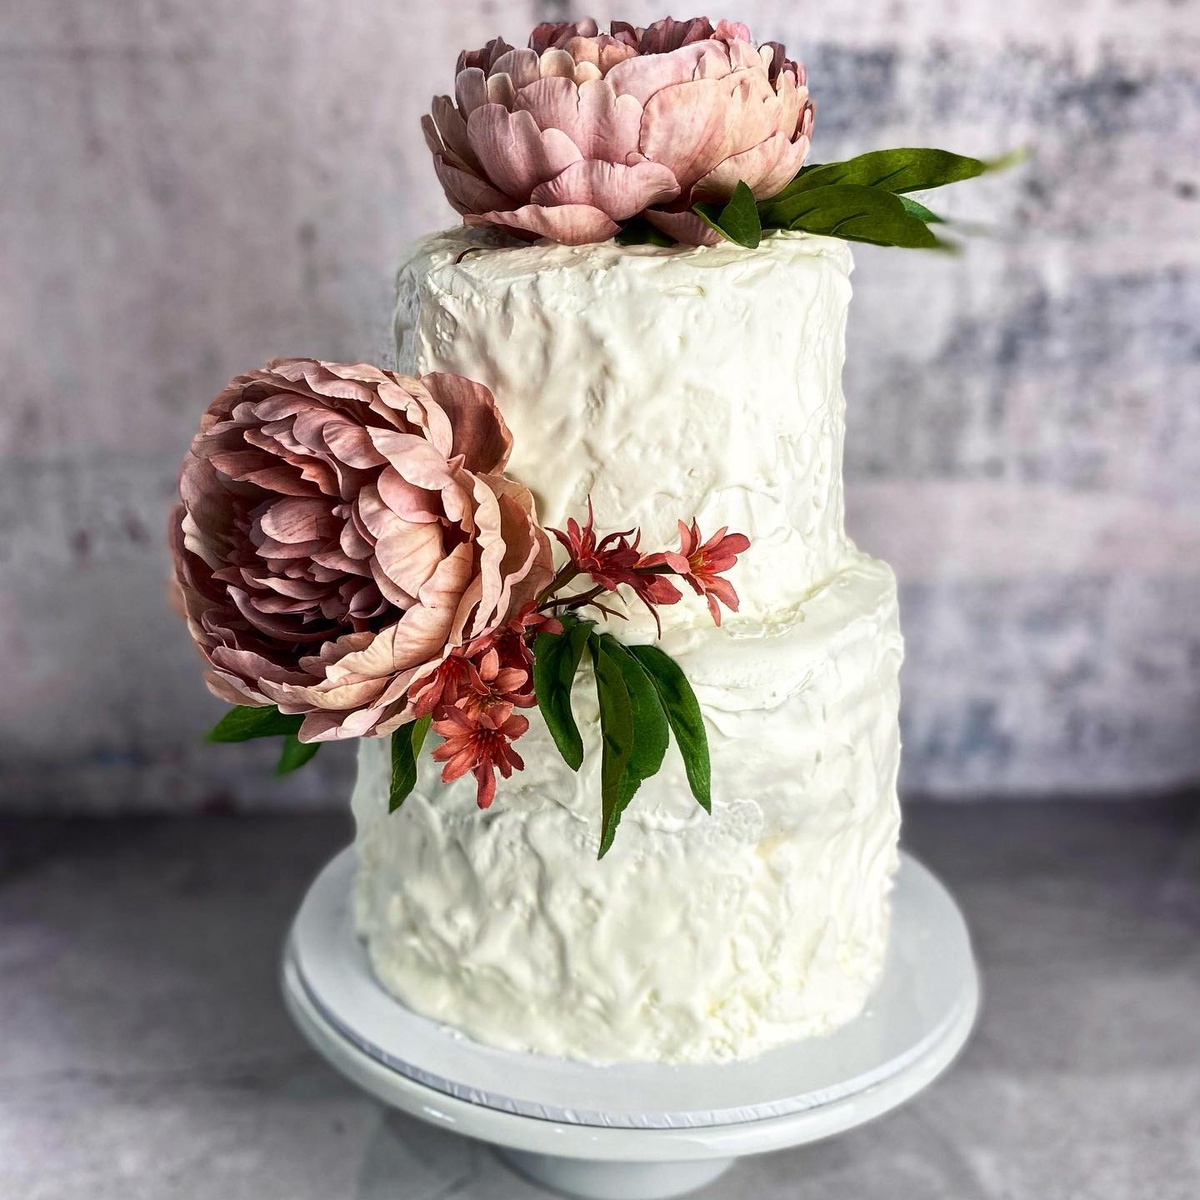 How To Make and Design Your Own Bridal Shower Cake?